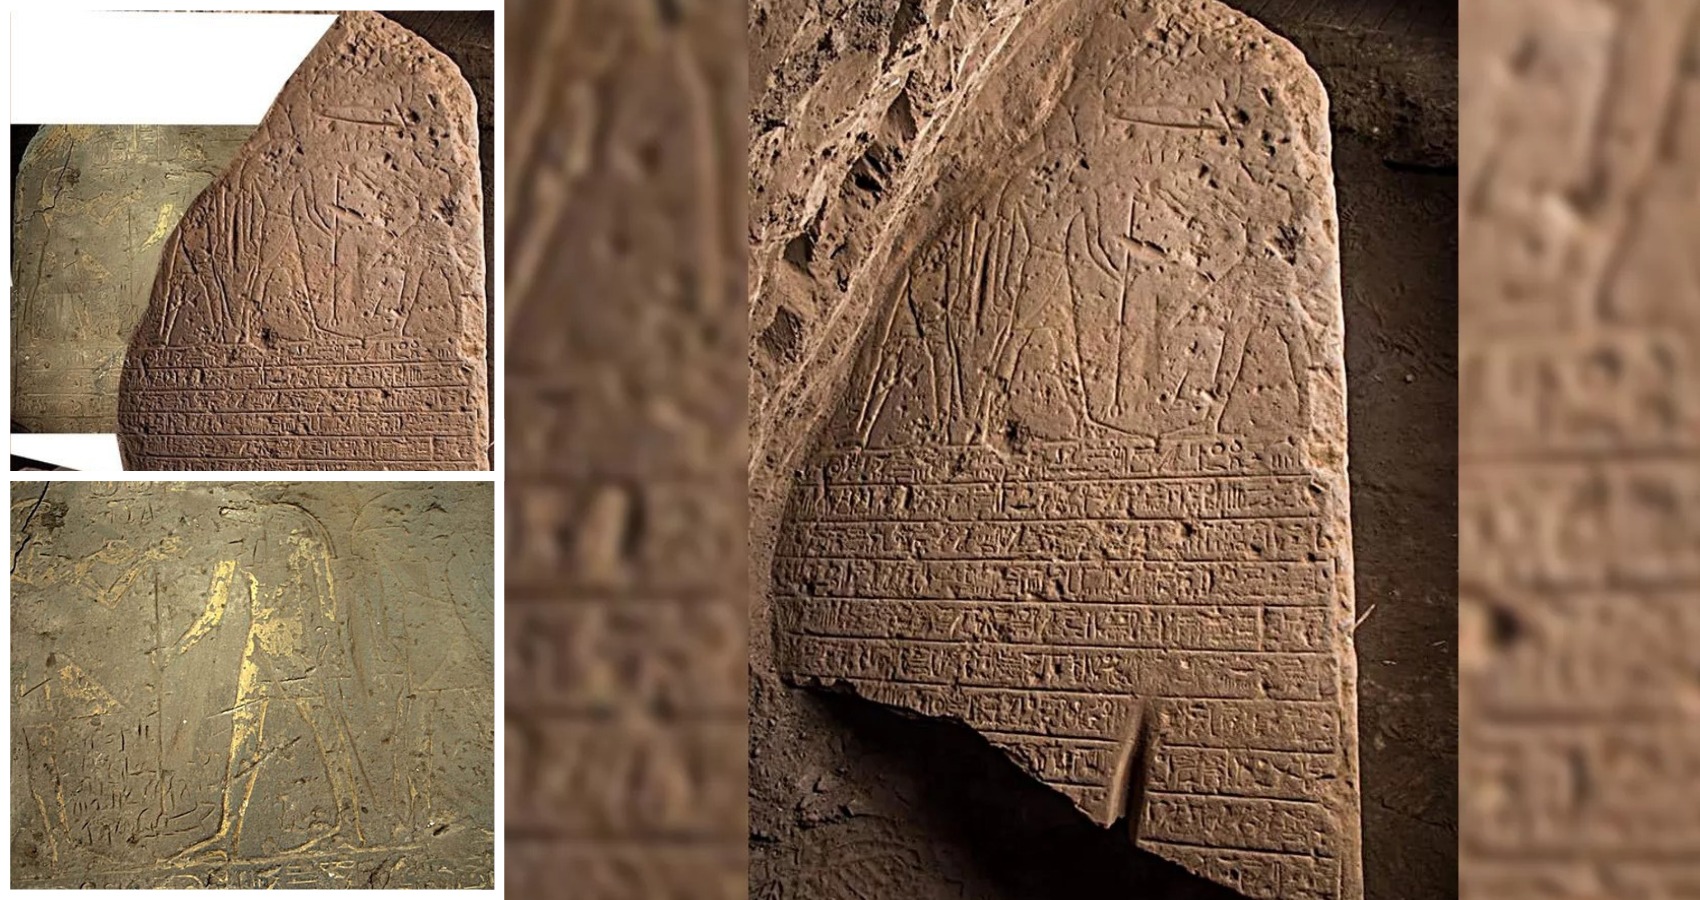 Stone Engravings of Famous Warrior Pharaoh Found in Ancient Egyptian Temple